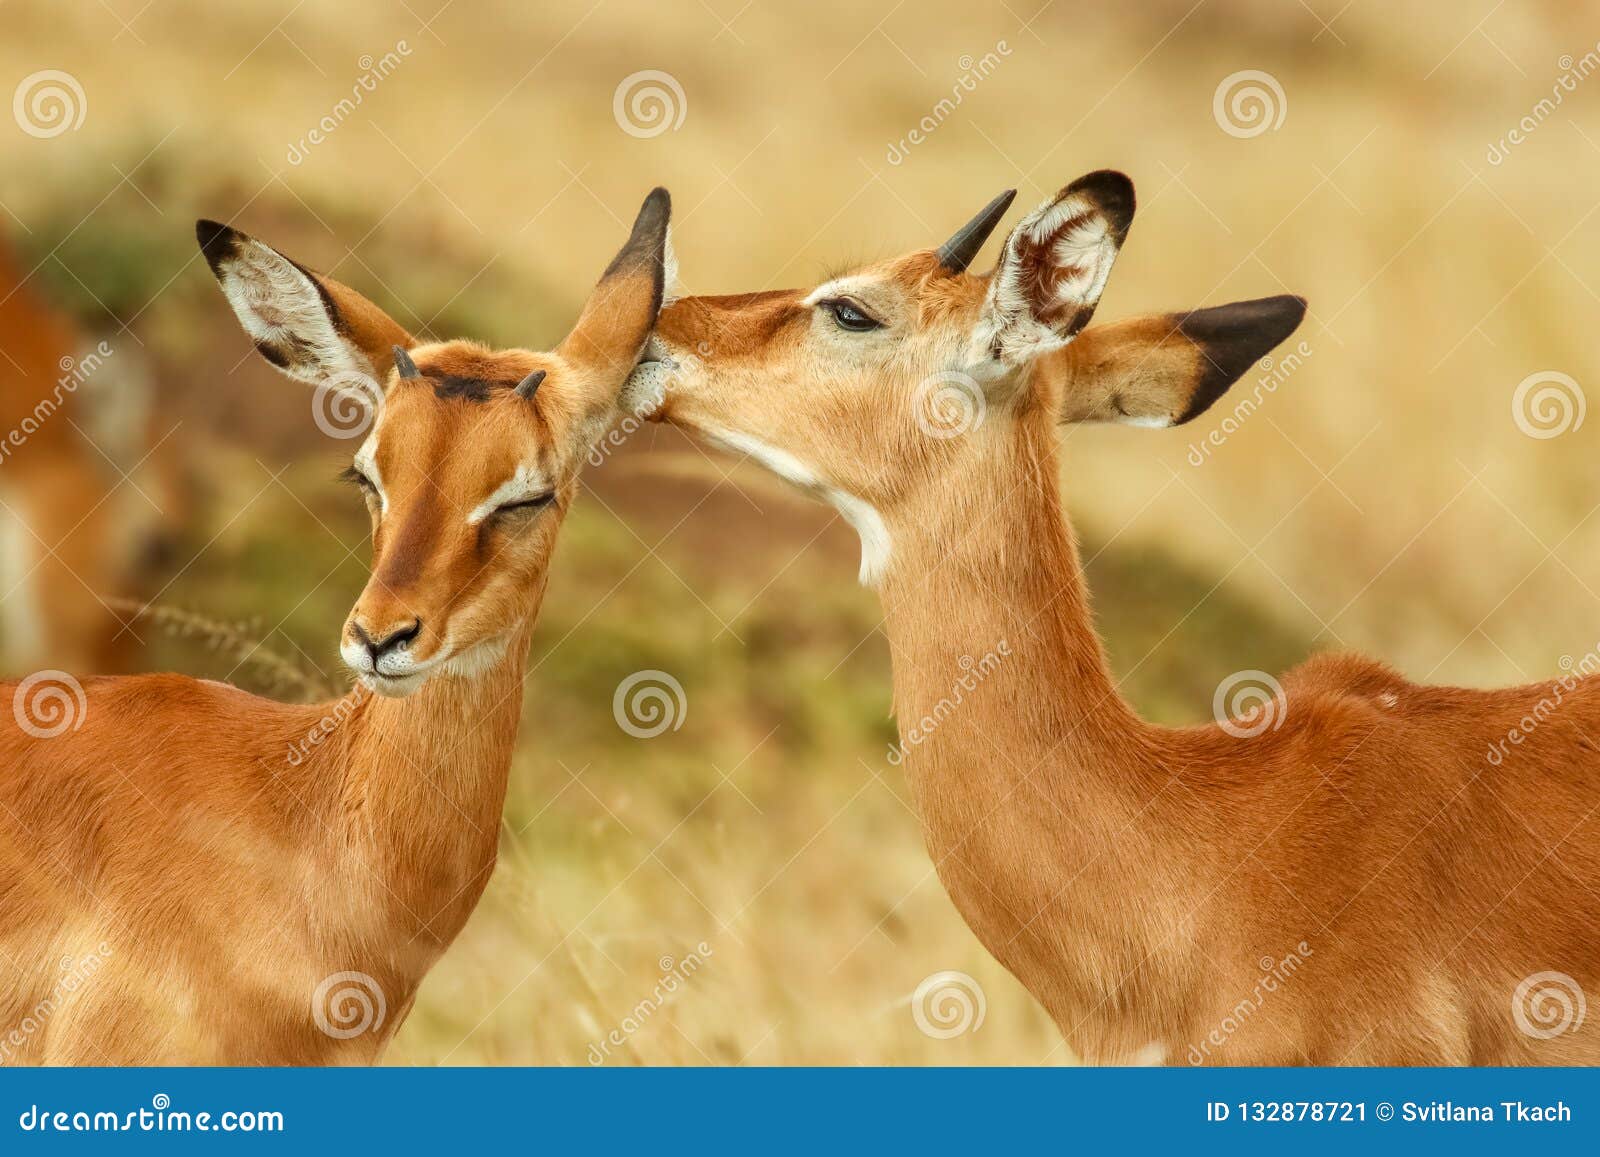 whisperers ;- a close-up of two impala from kenya.